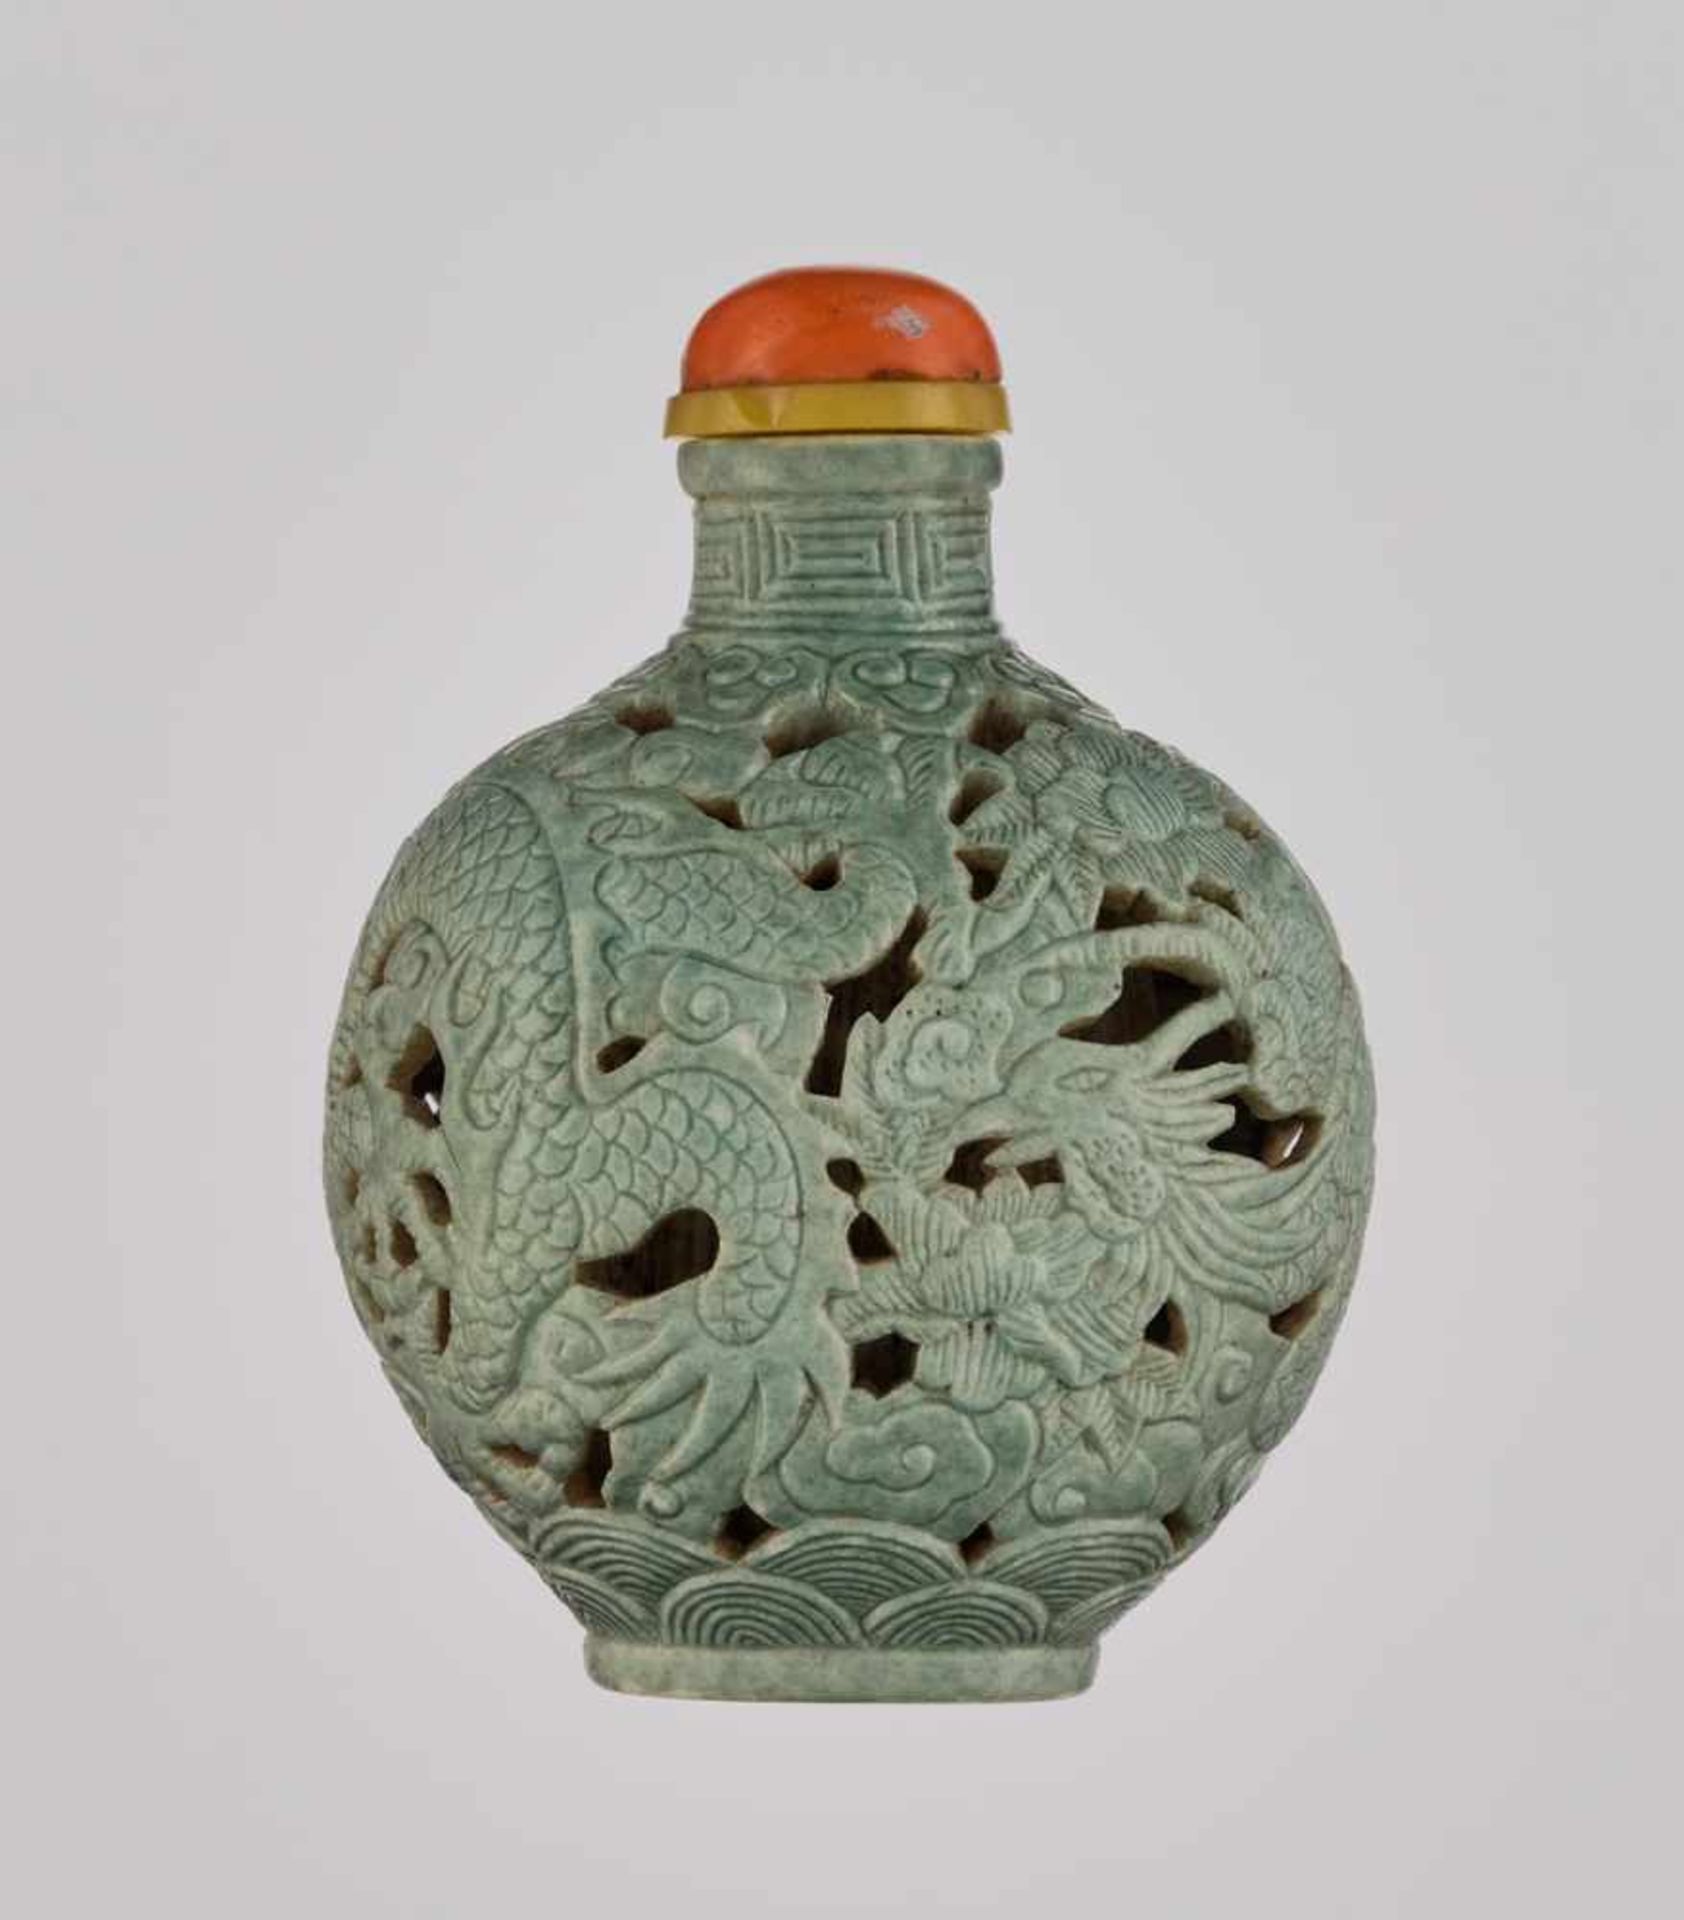 A RETICULATED TURQUOISE-GLAZED ‘DRAGON & PHOENIX’ PORCELAIN SNUFF BOTTLE Molded and carved porcelain - Image 2 of 6